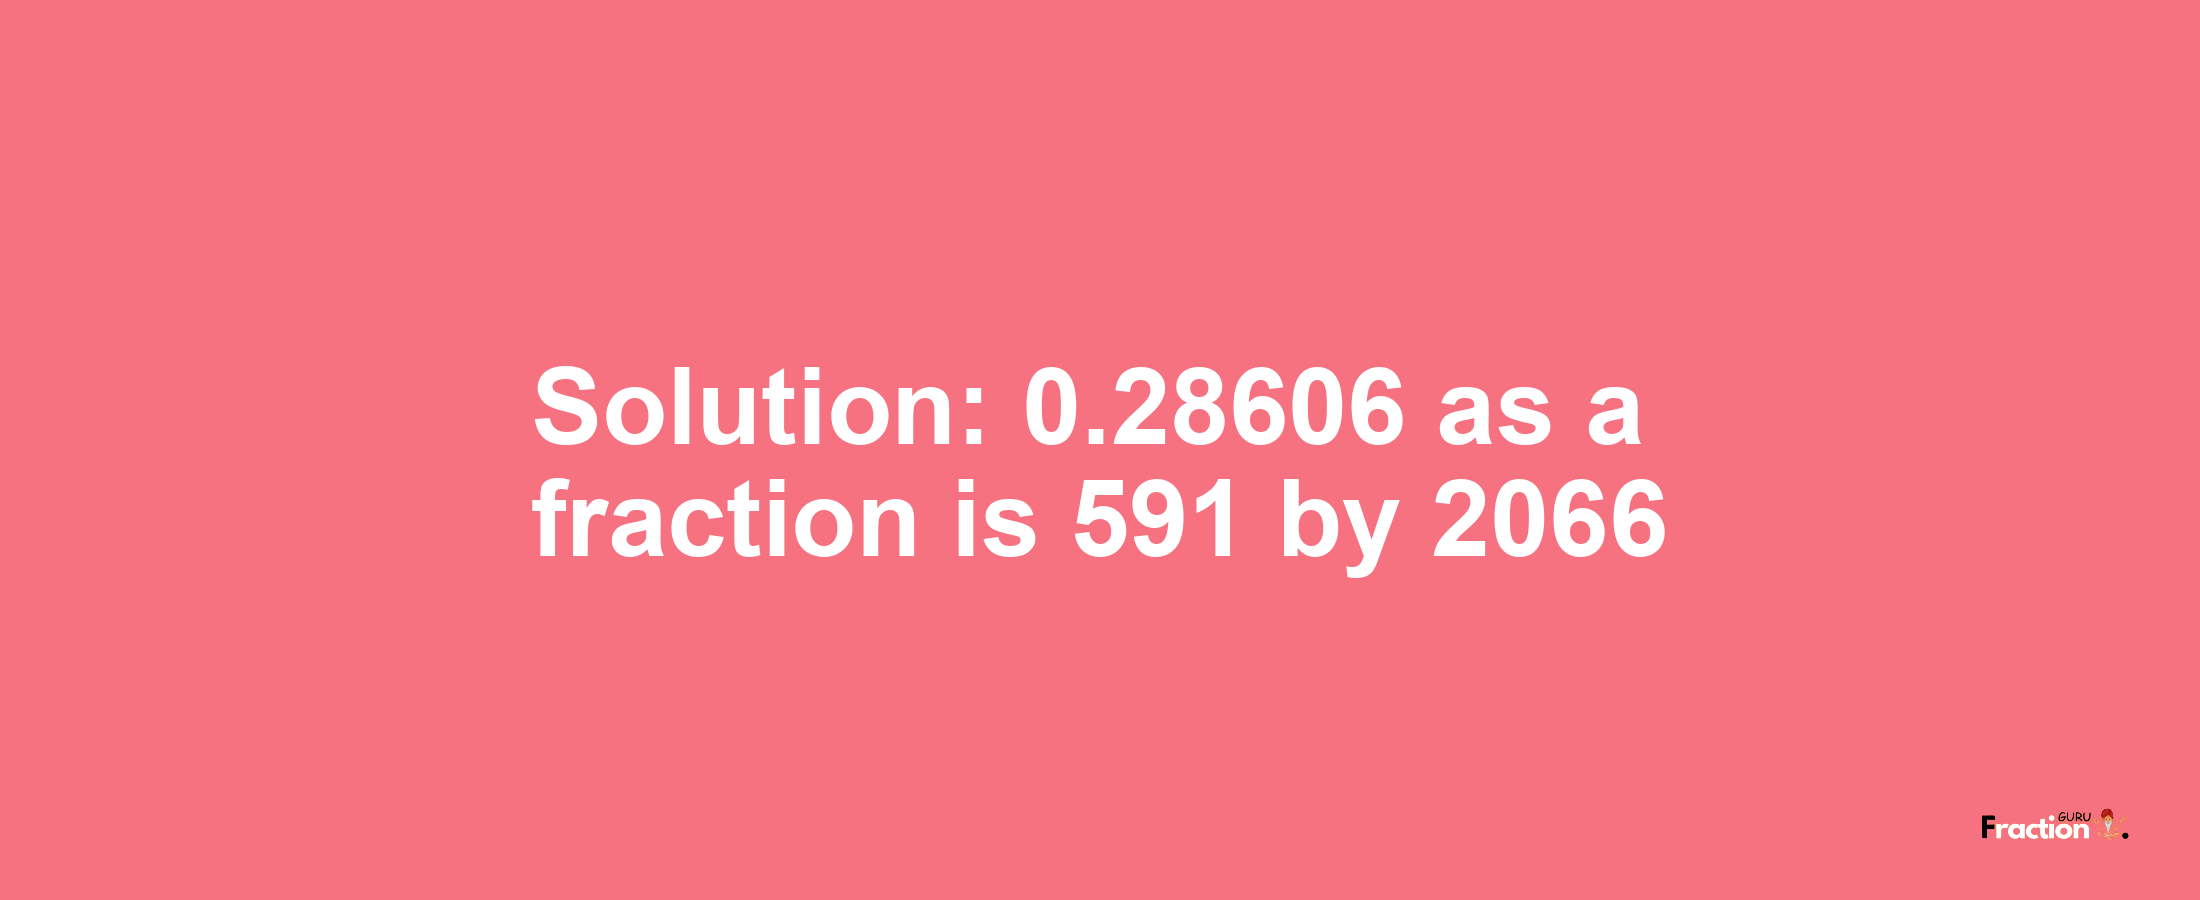 Solution:0.28606 as a fraction is 591/2066